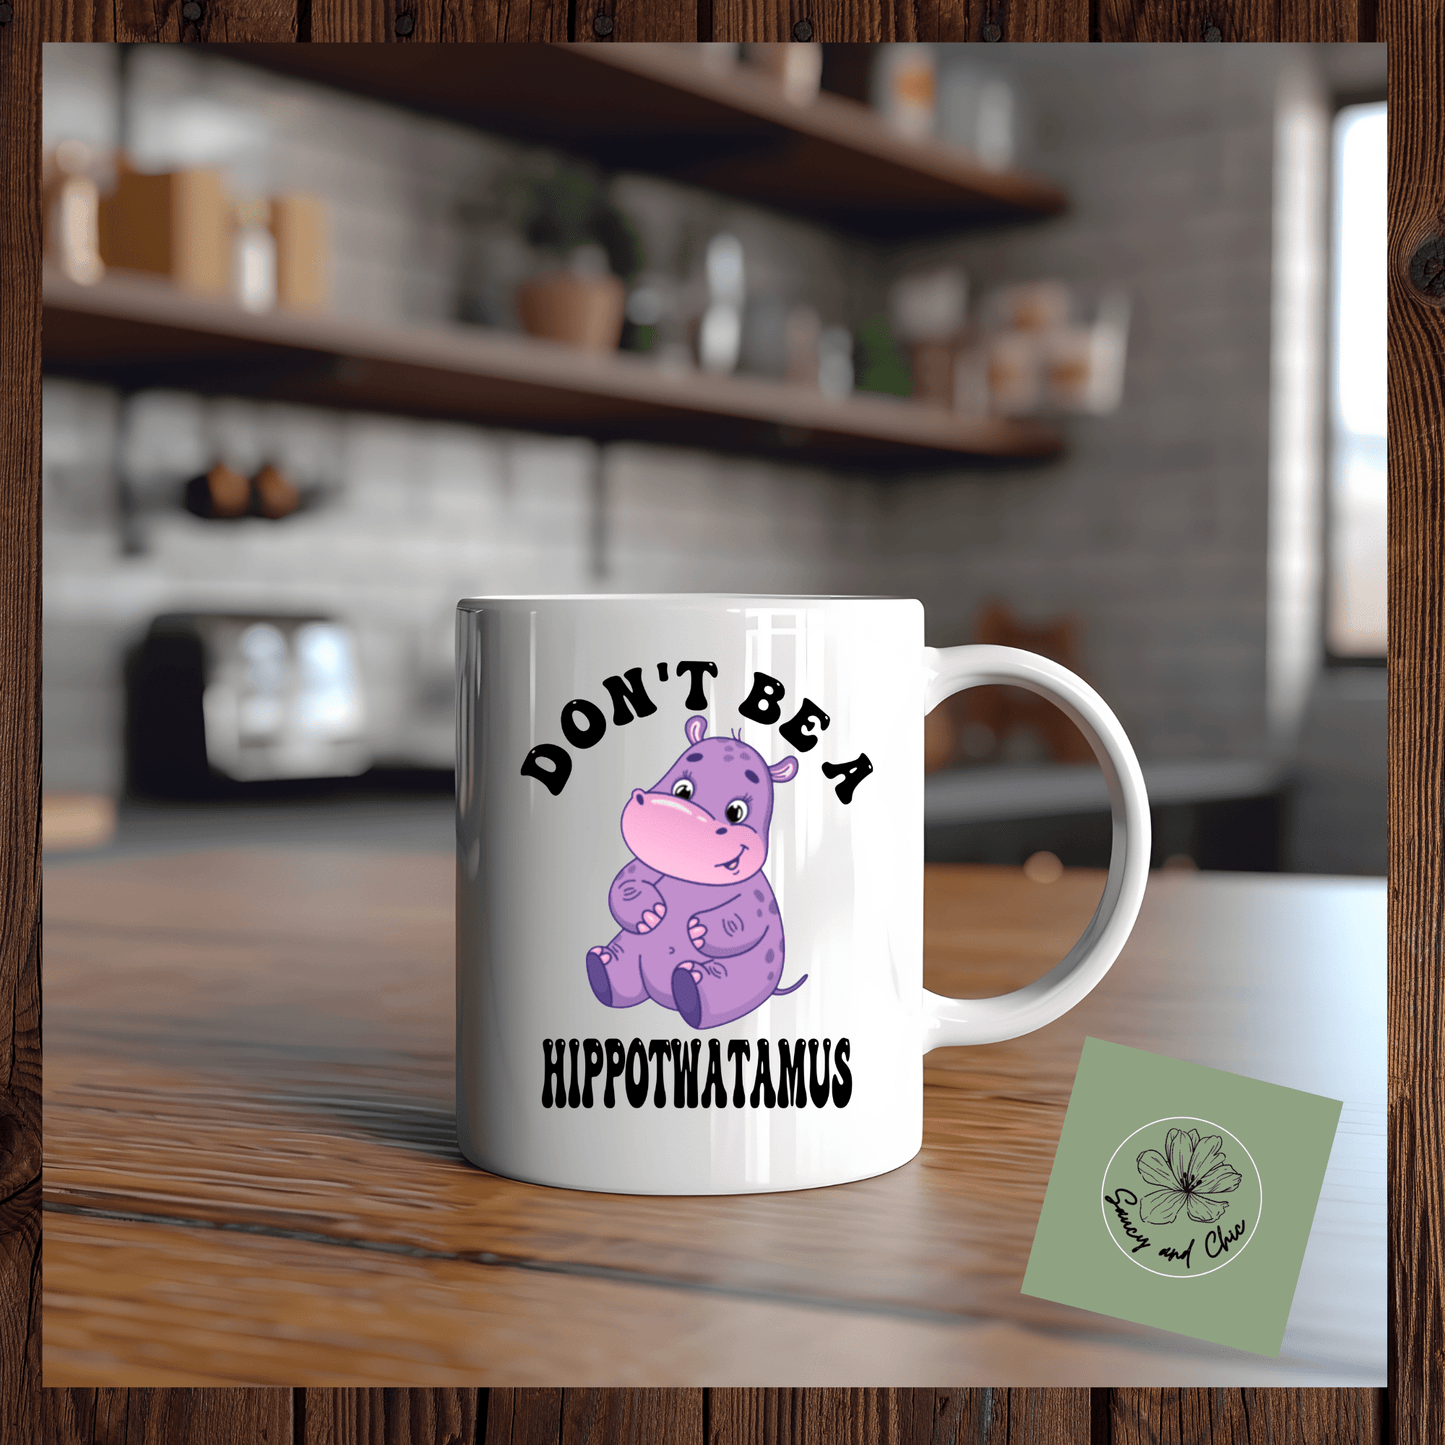 Don't be a hippotwatomus Ceramic Mug - Saucy and Chic